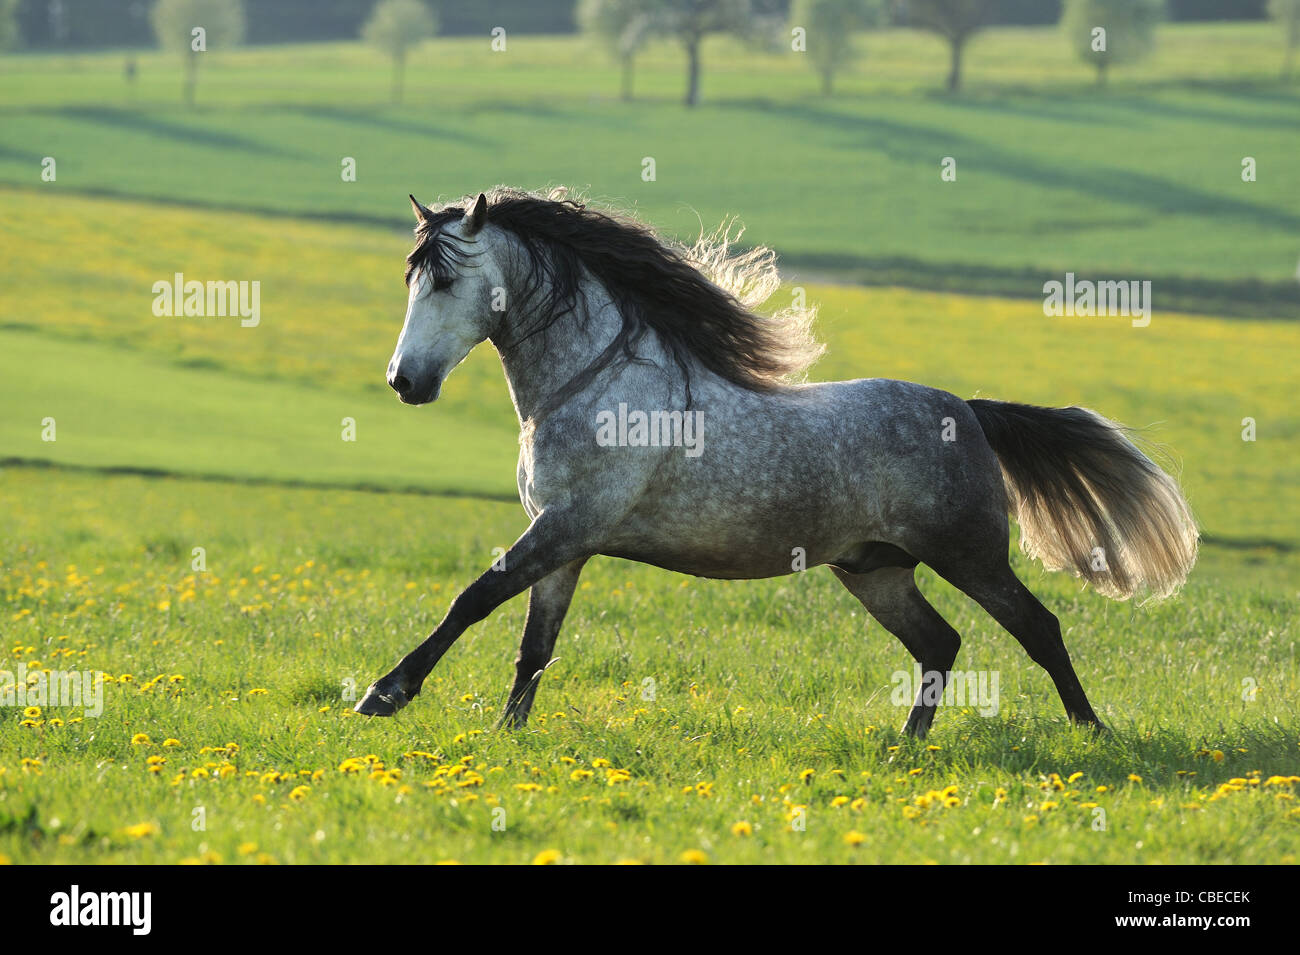 Andalusian Horse (Equus ferus caballus). Dapple gray gelding in a gallop on a meadow. Stock Photo